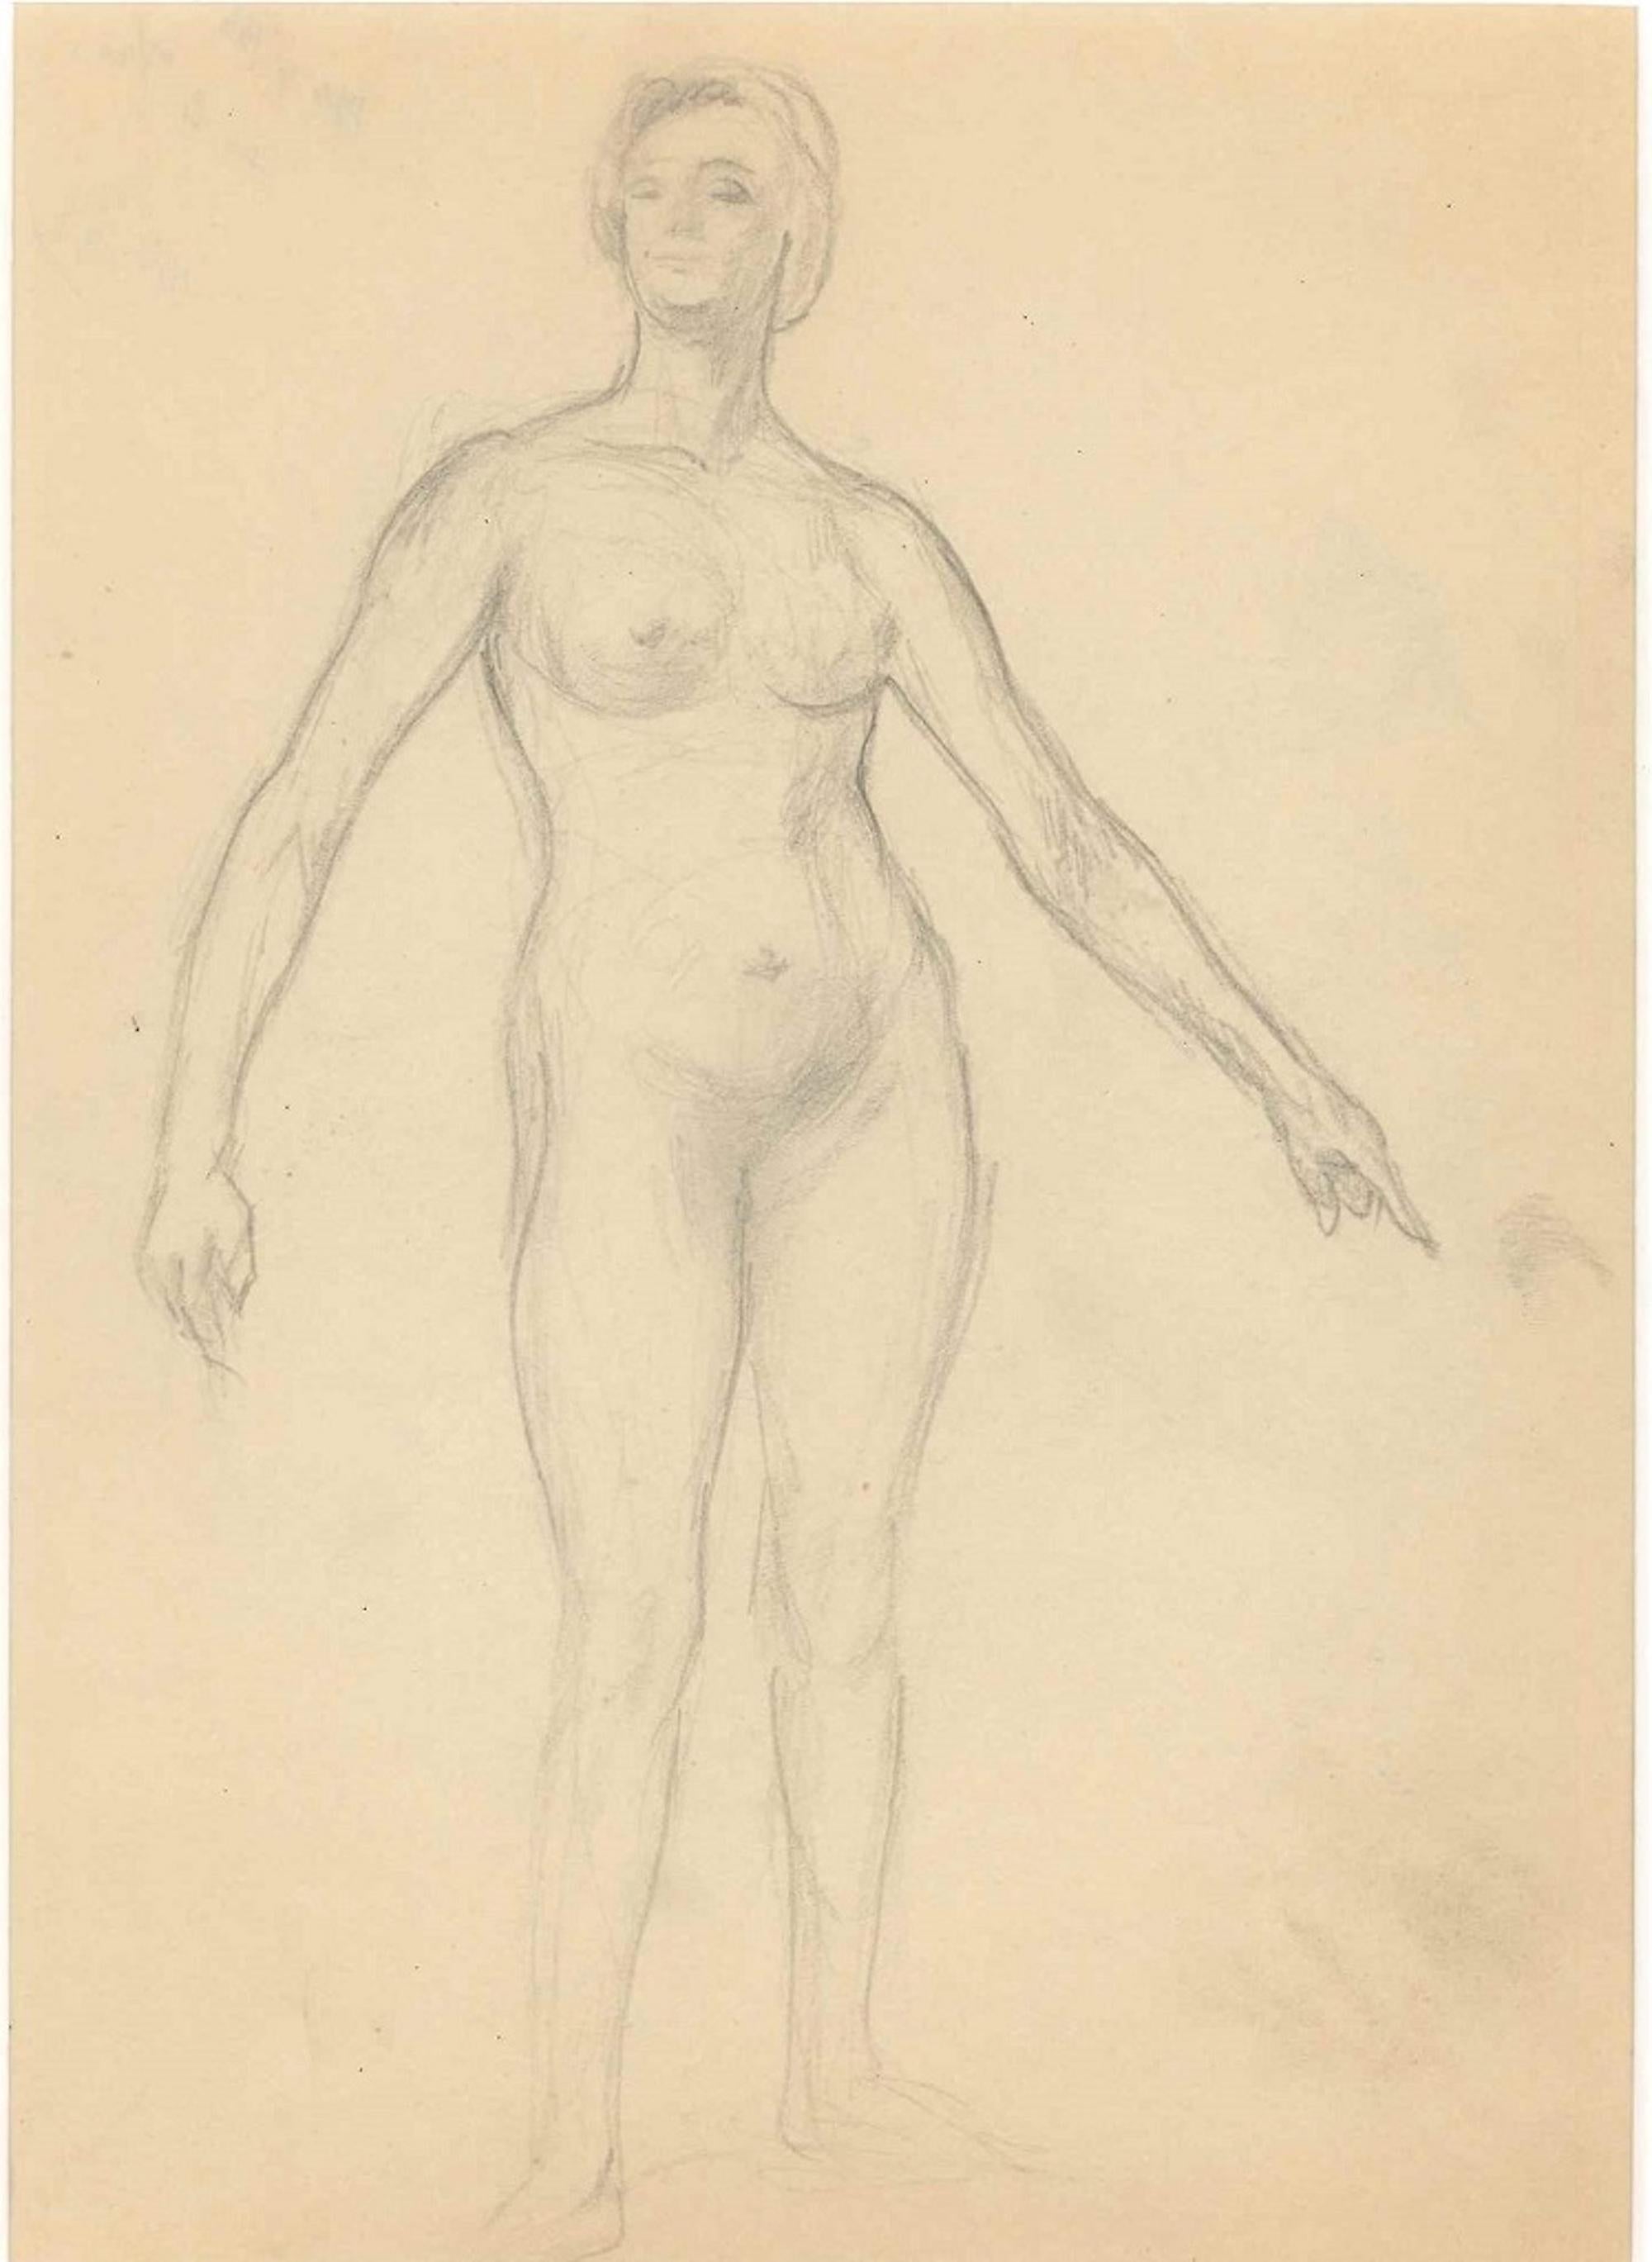 Standing Nude with Smiling Face  - Original Drawing - Early 20th Century - Art by Unknown